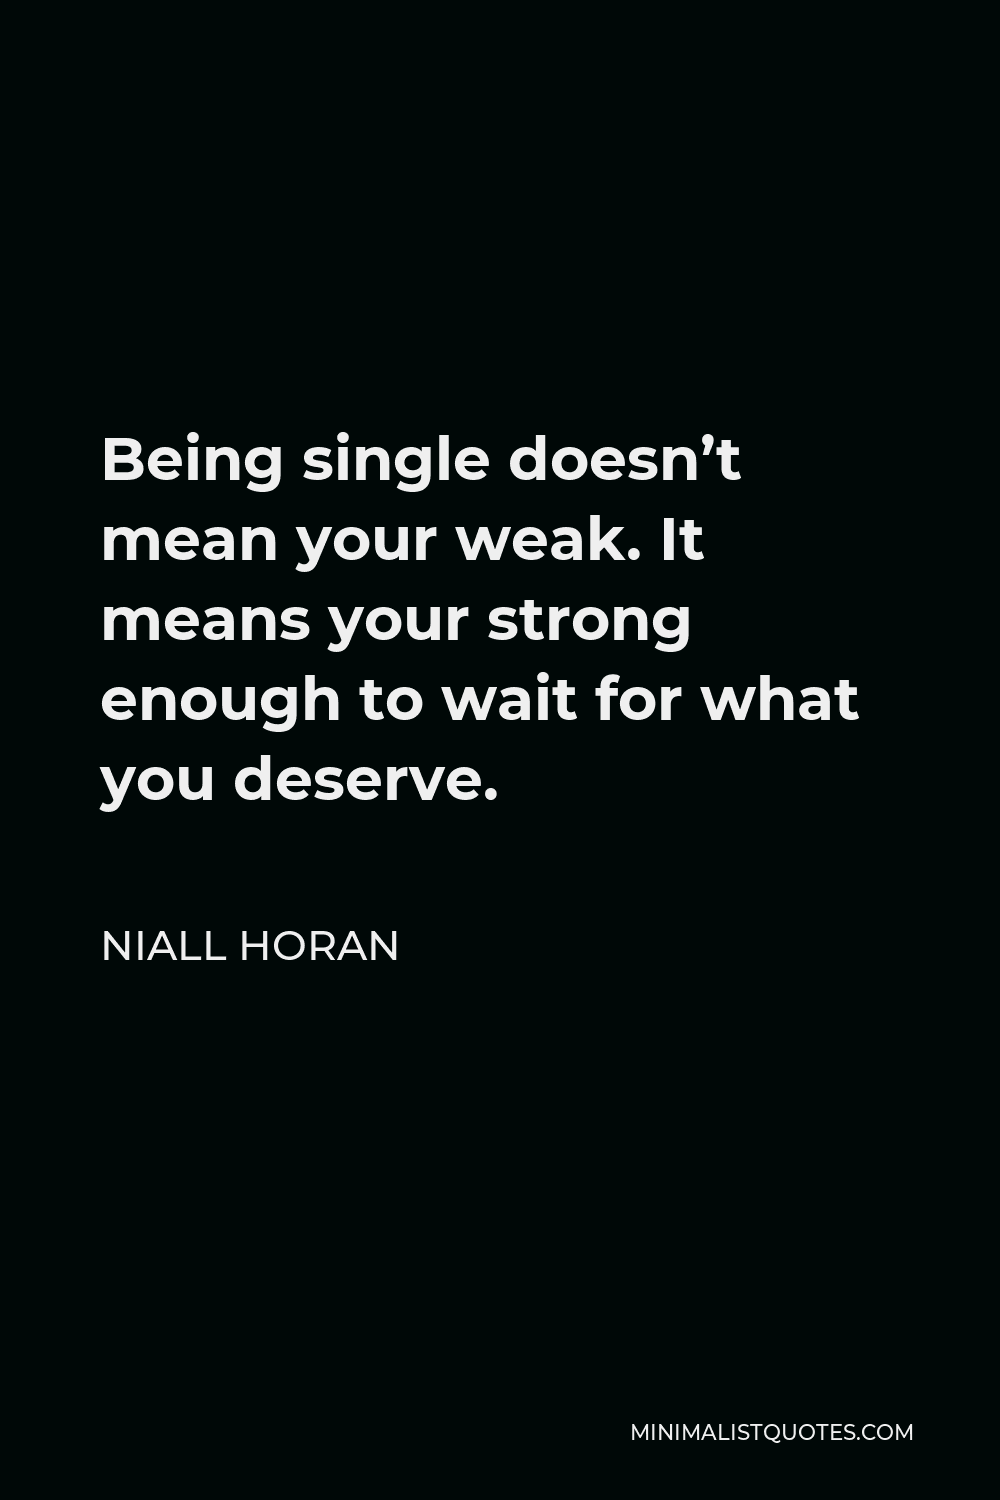 Niall Horan Quote - Being single doesn’t mean your weak. It means your strong enough to wait for what you deserve.